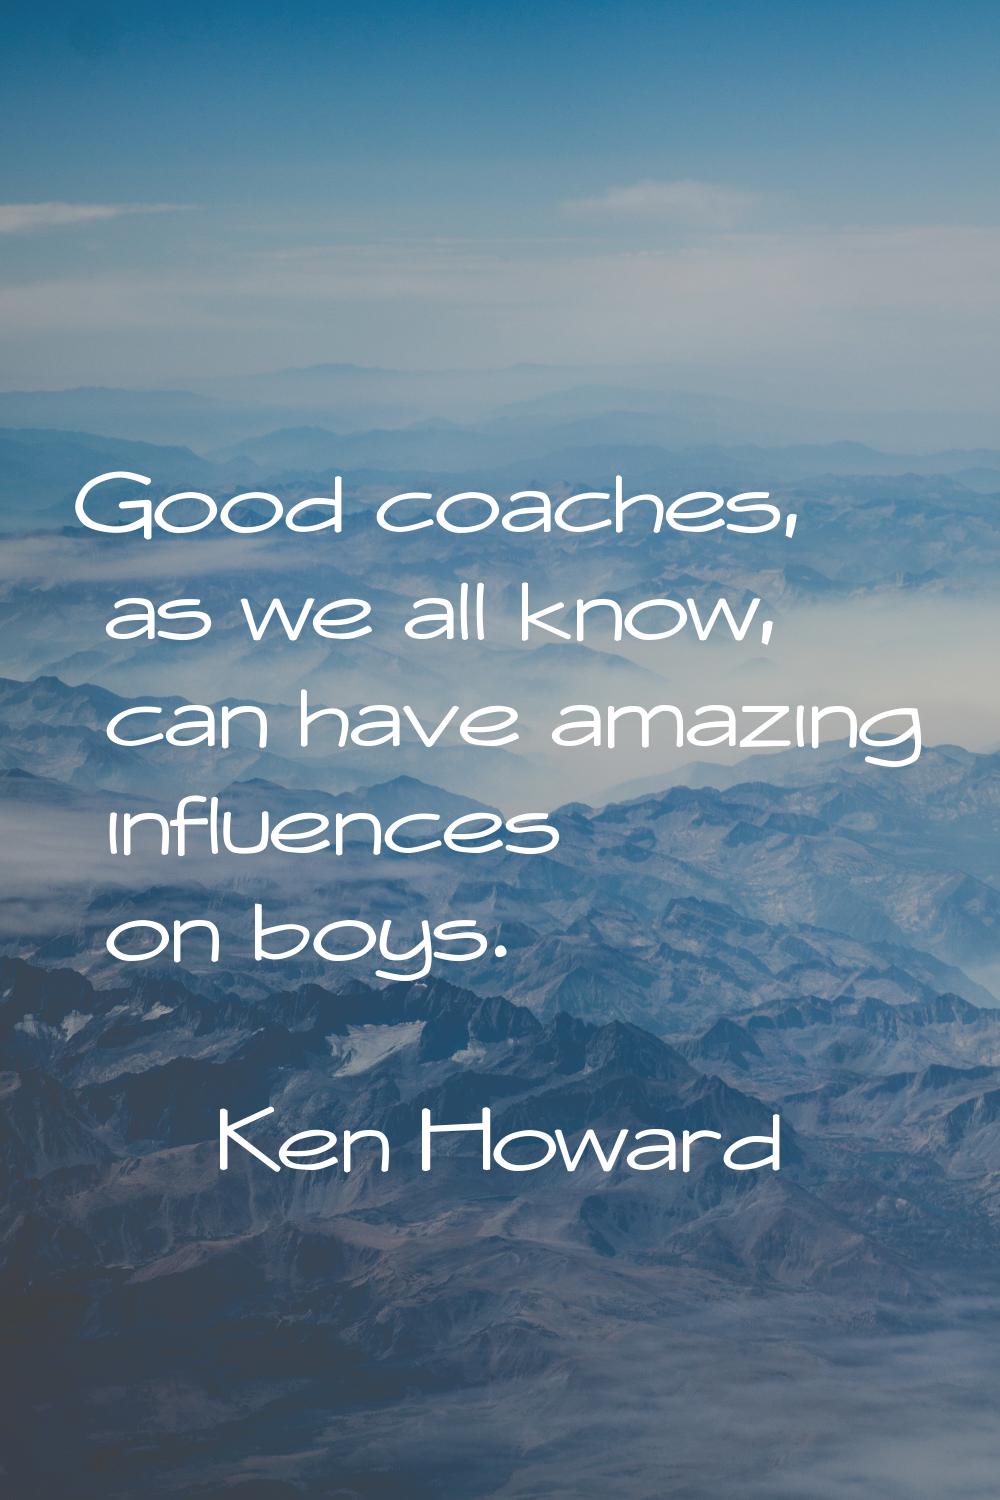 Good coaches, as we all know, can have amazing influences on boys.